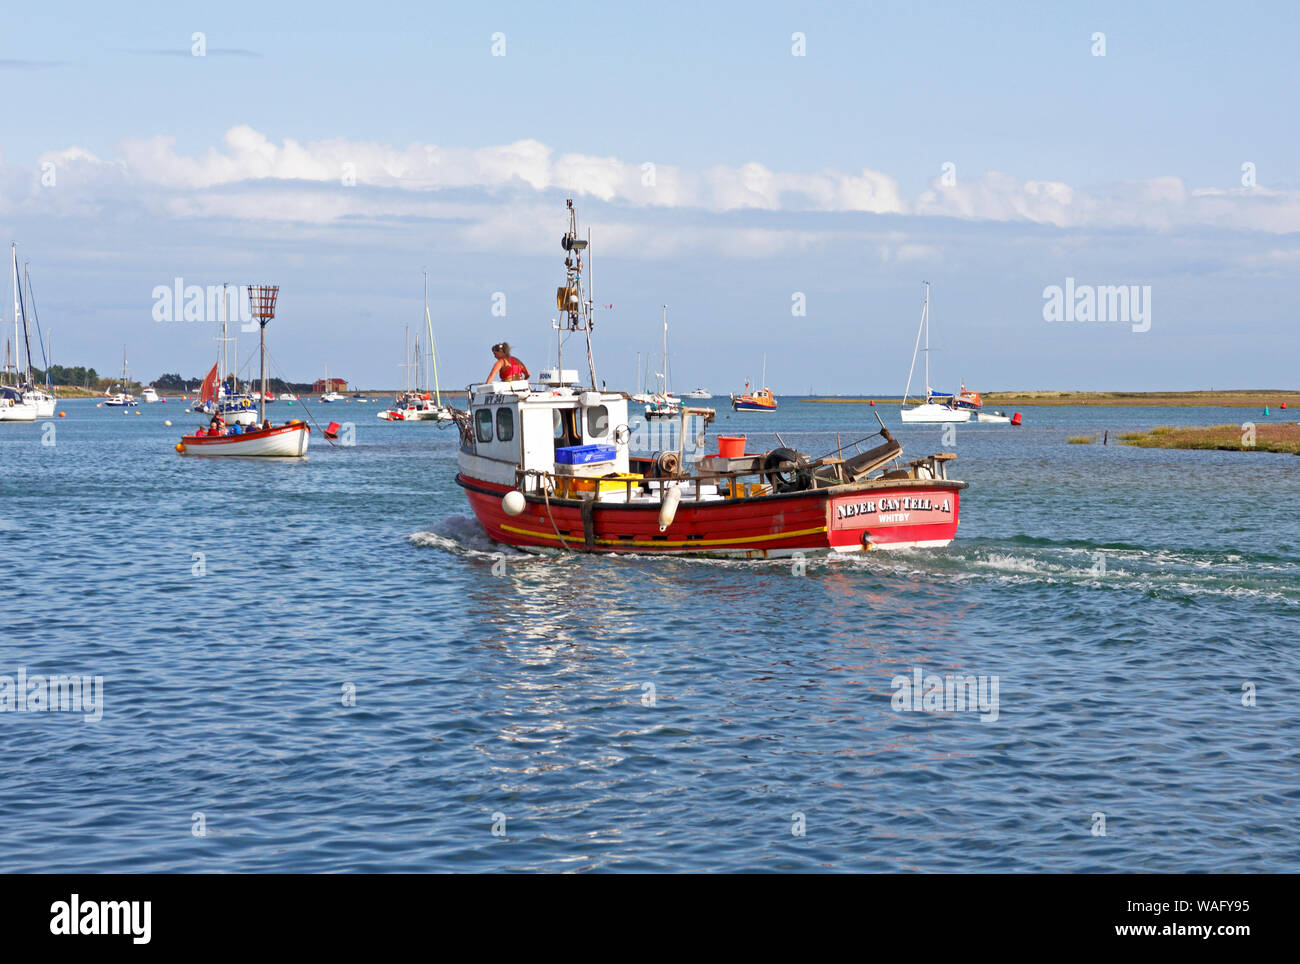 An inshore fishing boat heading out from the North Norfolk port of Wells-next-the-Sea, Norfolk, England, United Kingdom, Europe. Stock Photo